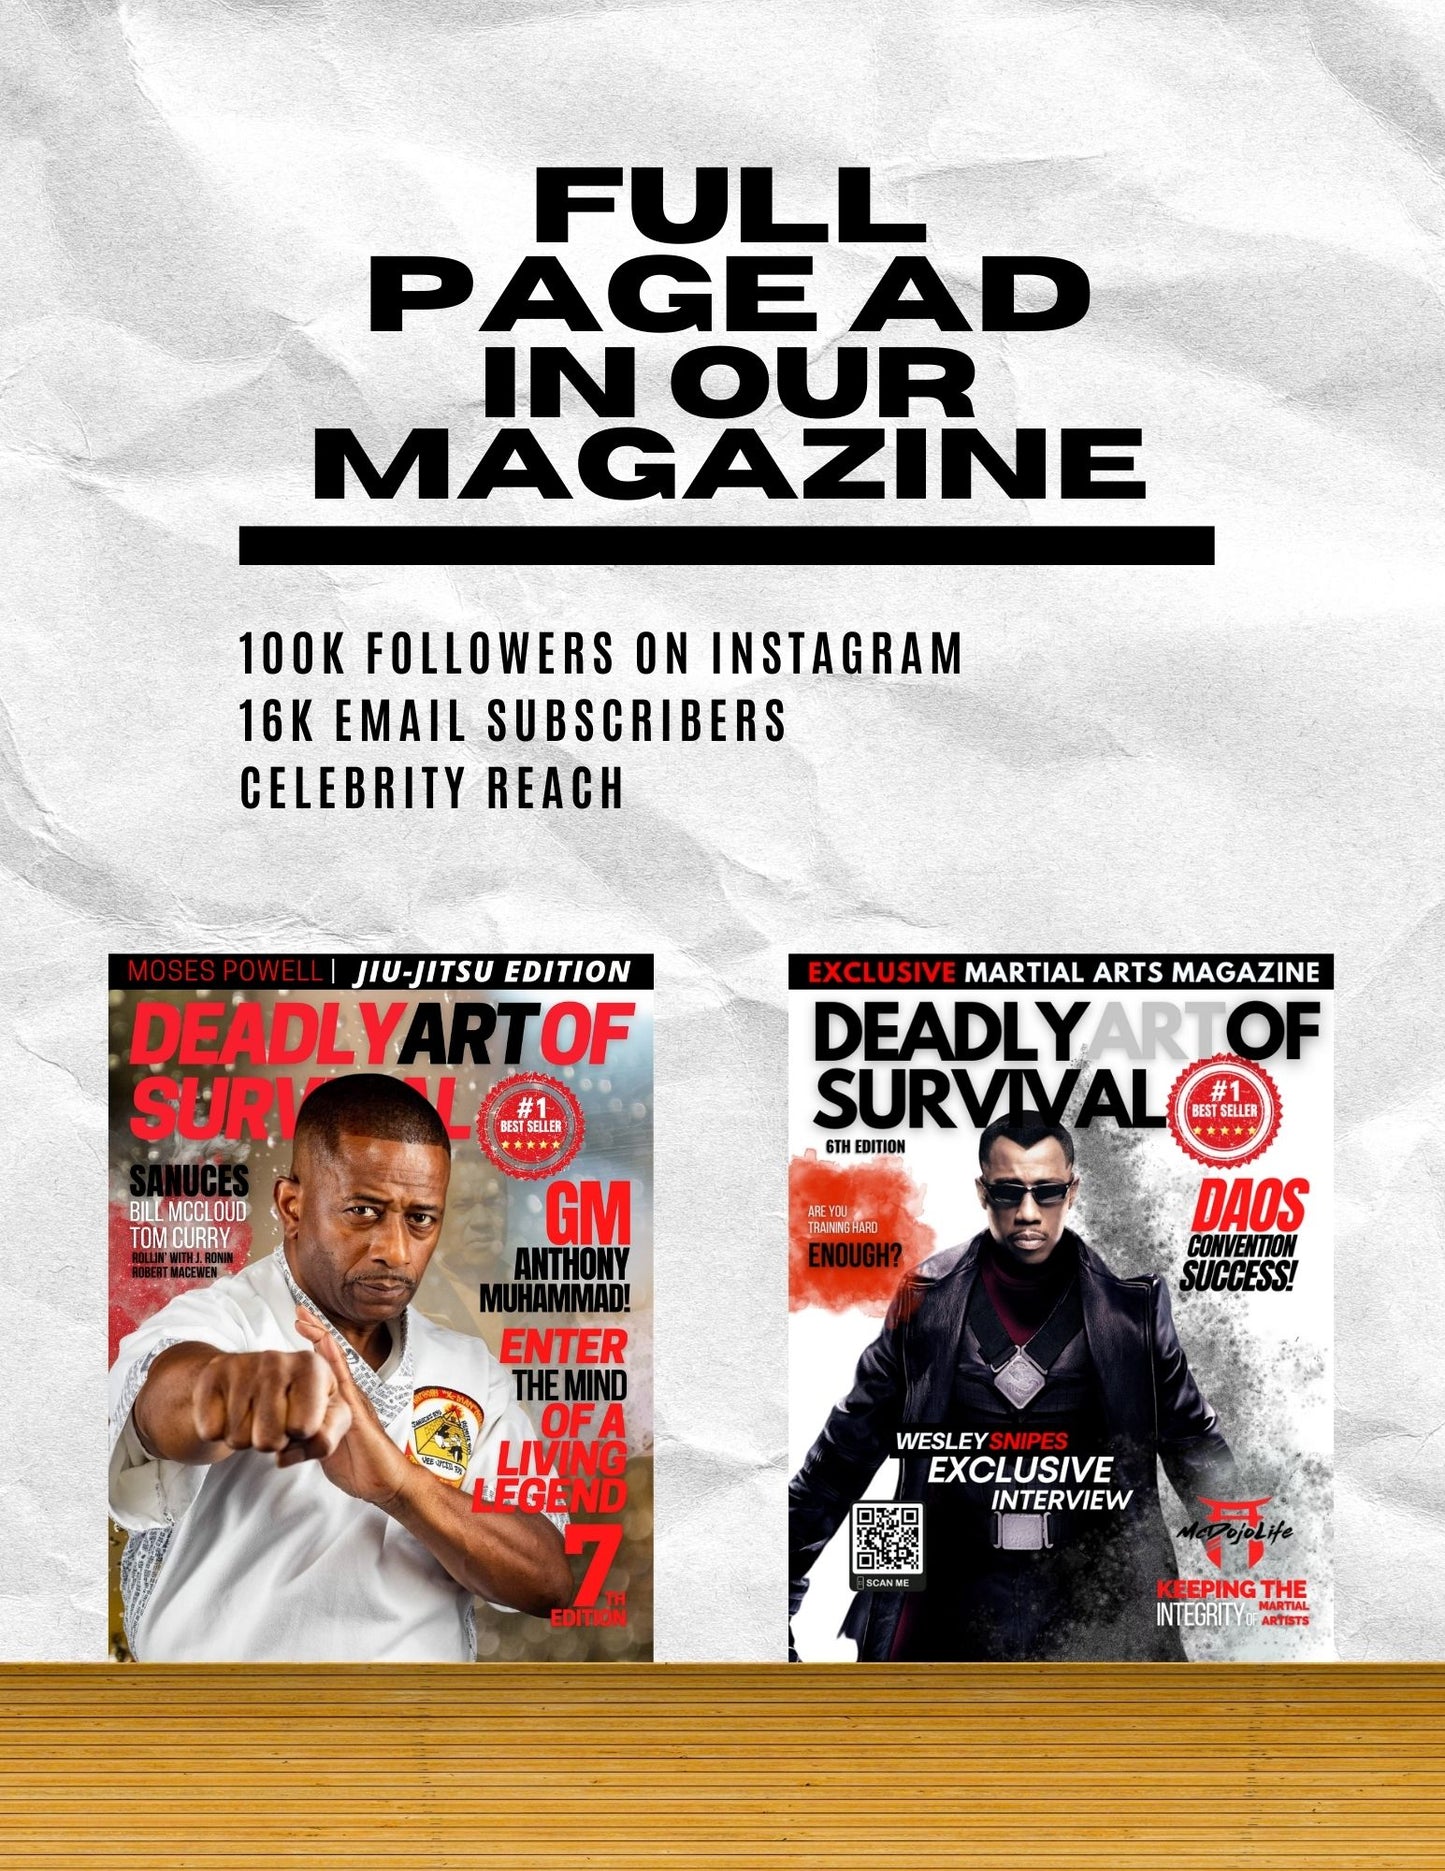 (Full Page Ad) Advertise in our magazine deadlyartofsurvival.com